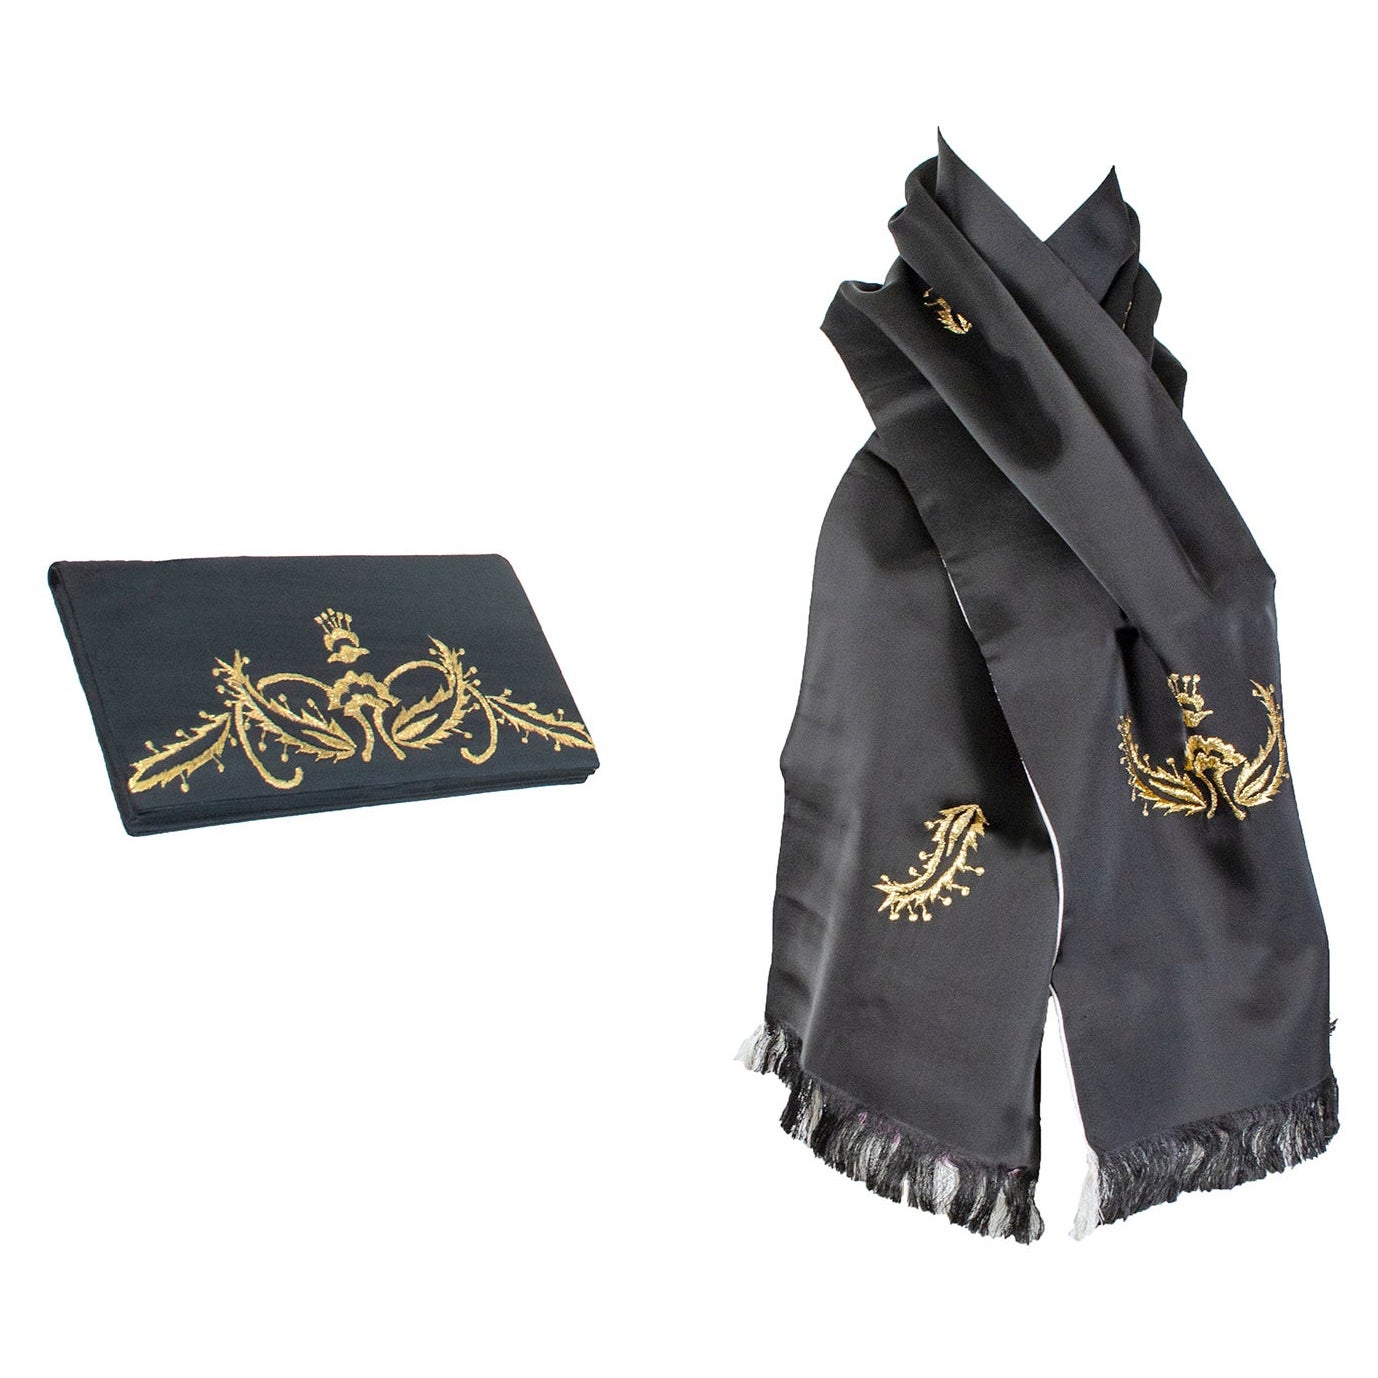 Black Satin Scarf and Matching Evening Clutch with Gold Embroidery – 53”, 1950s